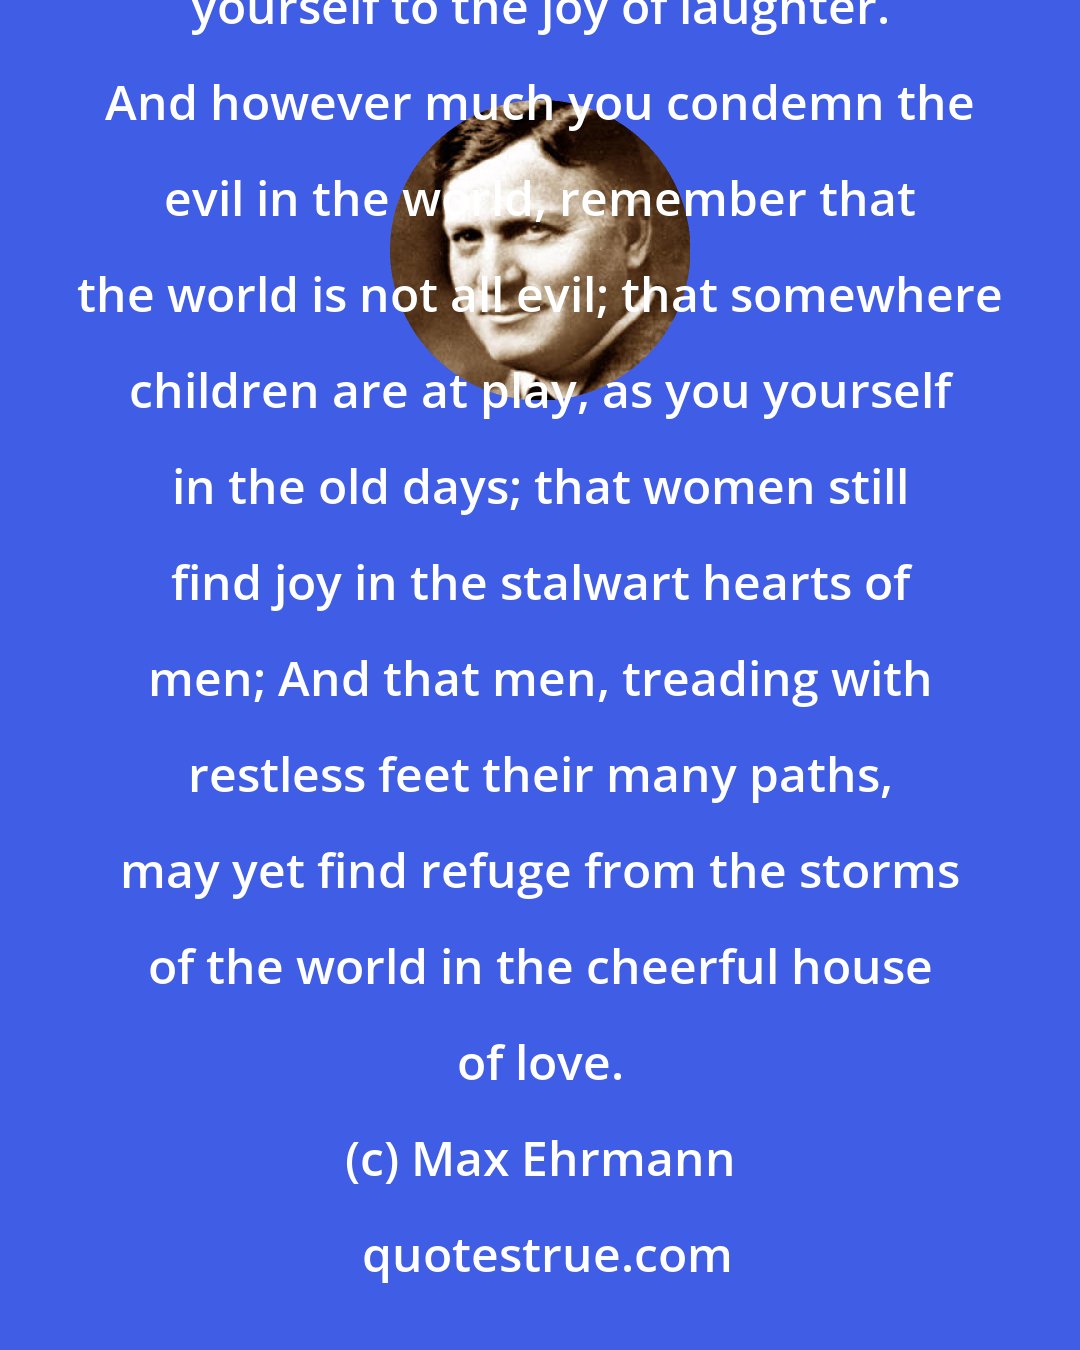 Max Ehrmann: Whatever else you do or forbear, impose upon yourself the task of happiness; and now and then abandon yourself to the joy of laughter. And however much you condemn the evil in the world, remember that the world is not all evil; that somewhere children are at play, as you yourself in the old days; that women still find joy in the stalwart hearts of men; And that men, treading with restless feet their many paths, may yet find refuge from the storms of the world in the cheerful house of love.